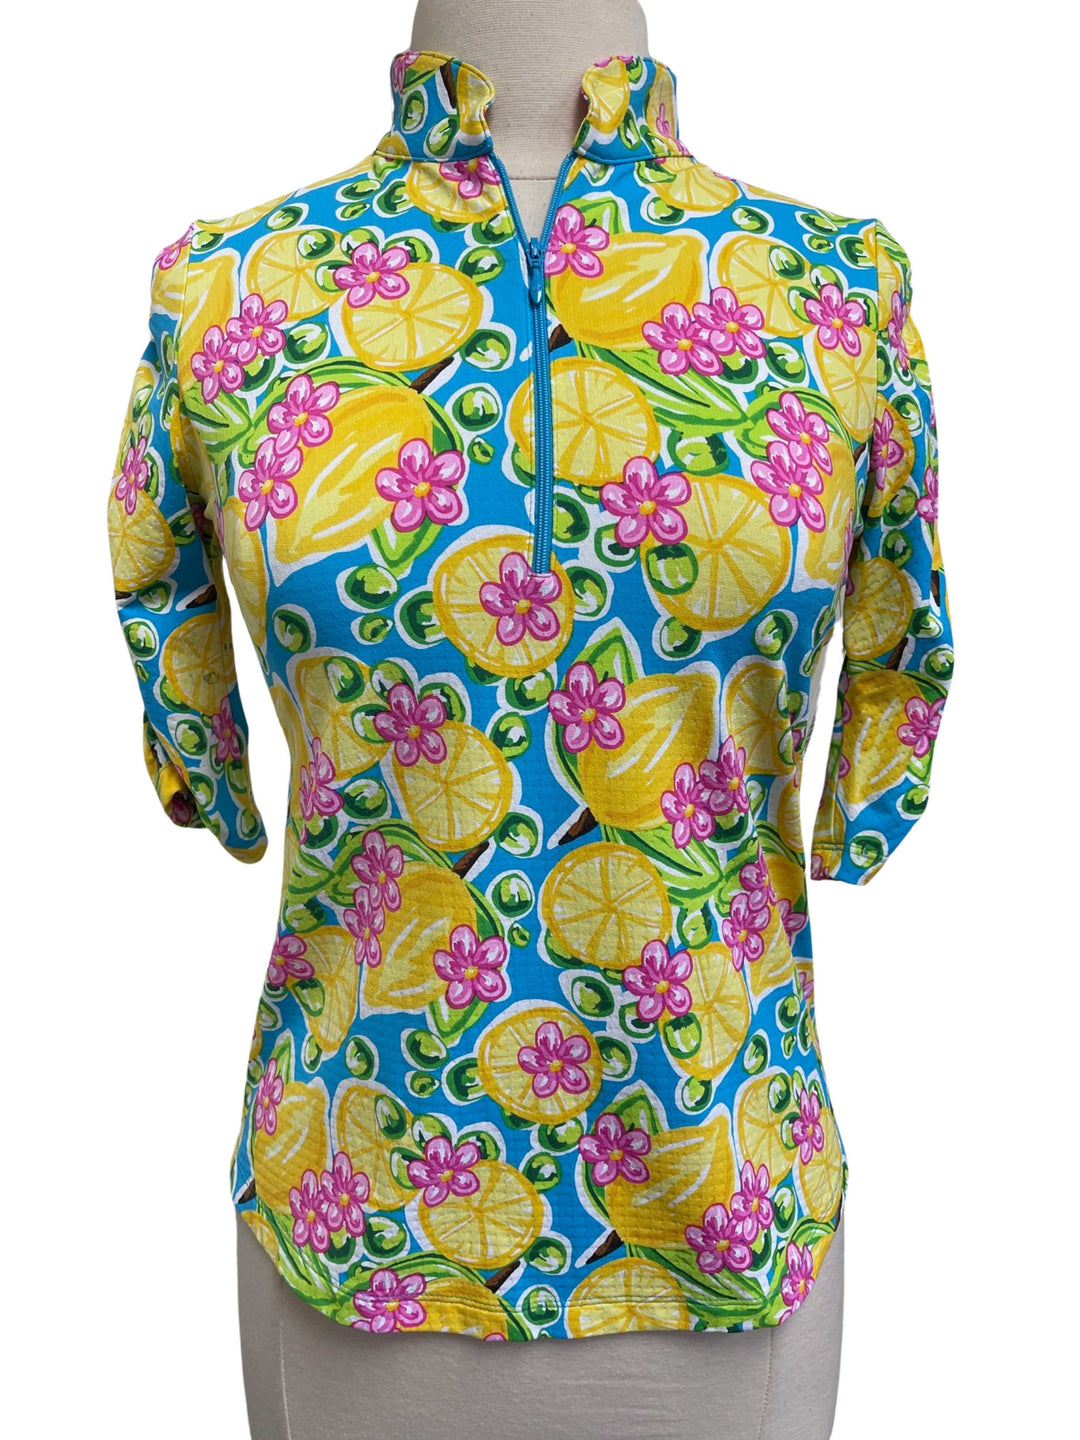 IBKUL Calista Print Ruched Elbow Length Sleeve Top- Size Small - Skorzie